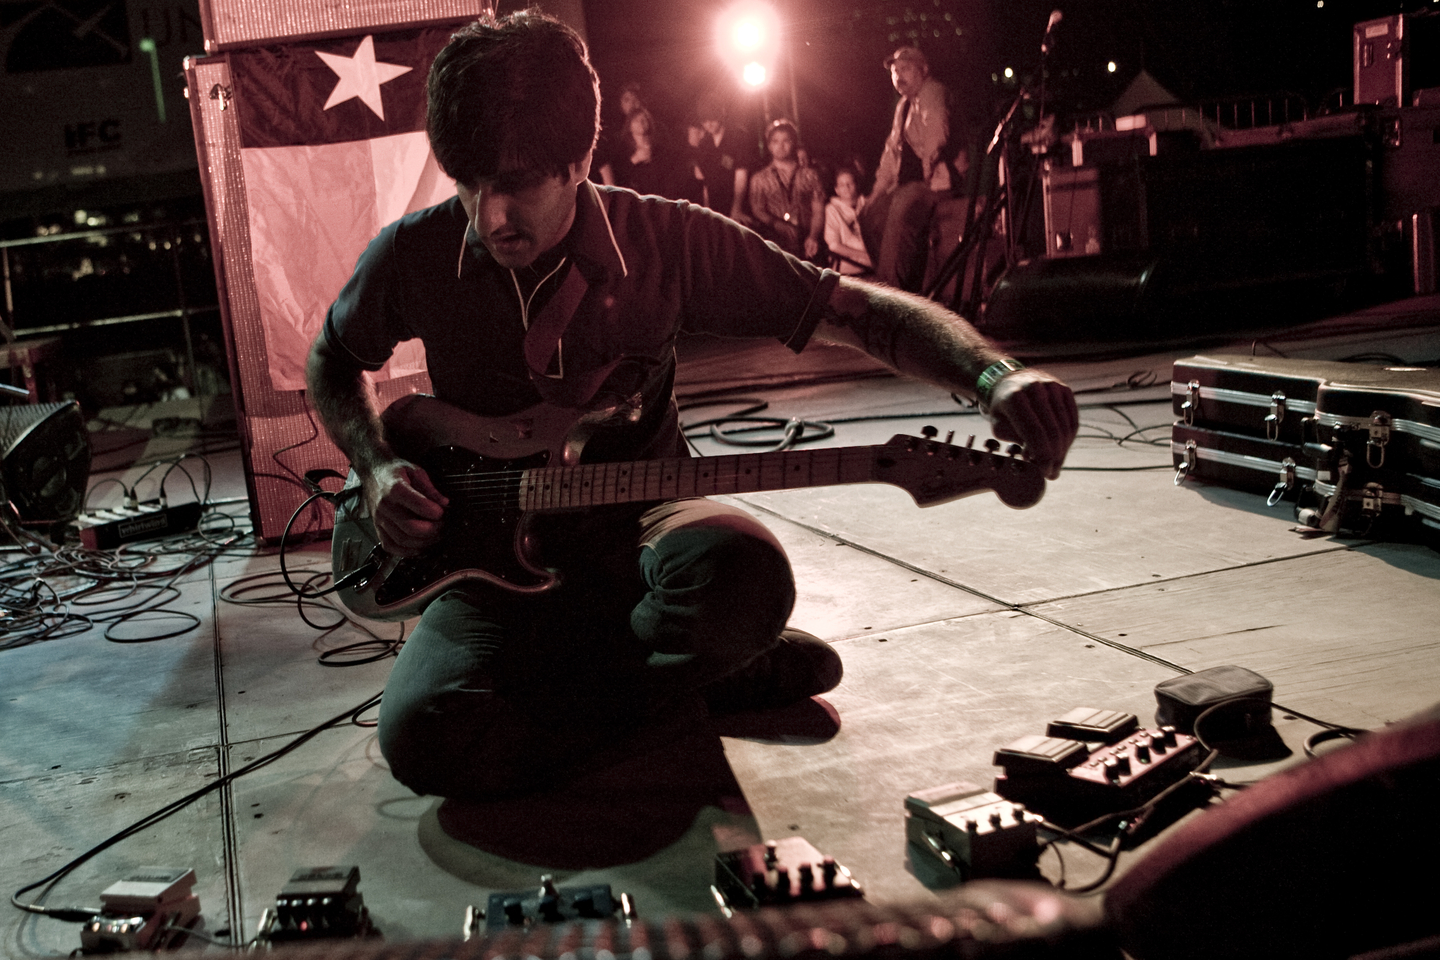 Explosions in the Sky, 2009. Photo by Gideon Tsang